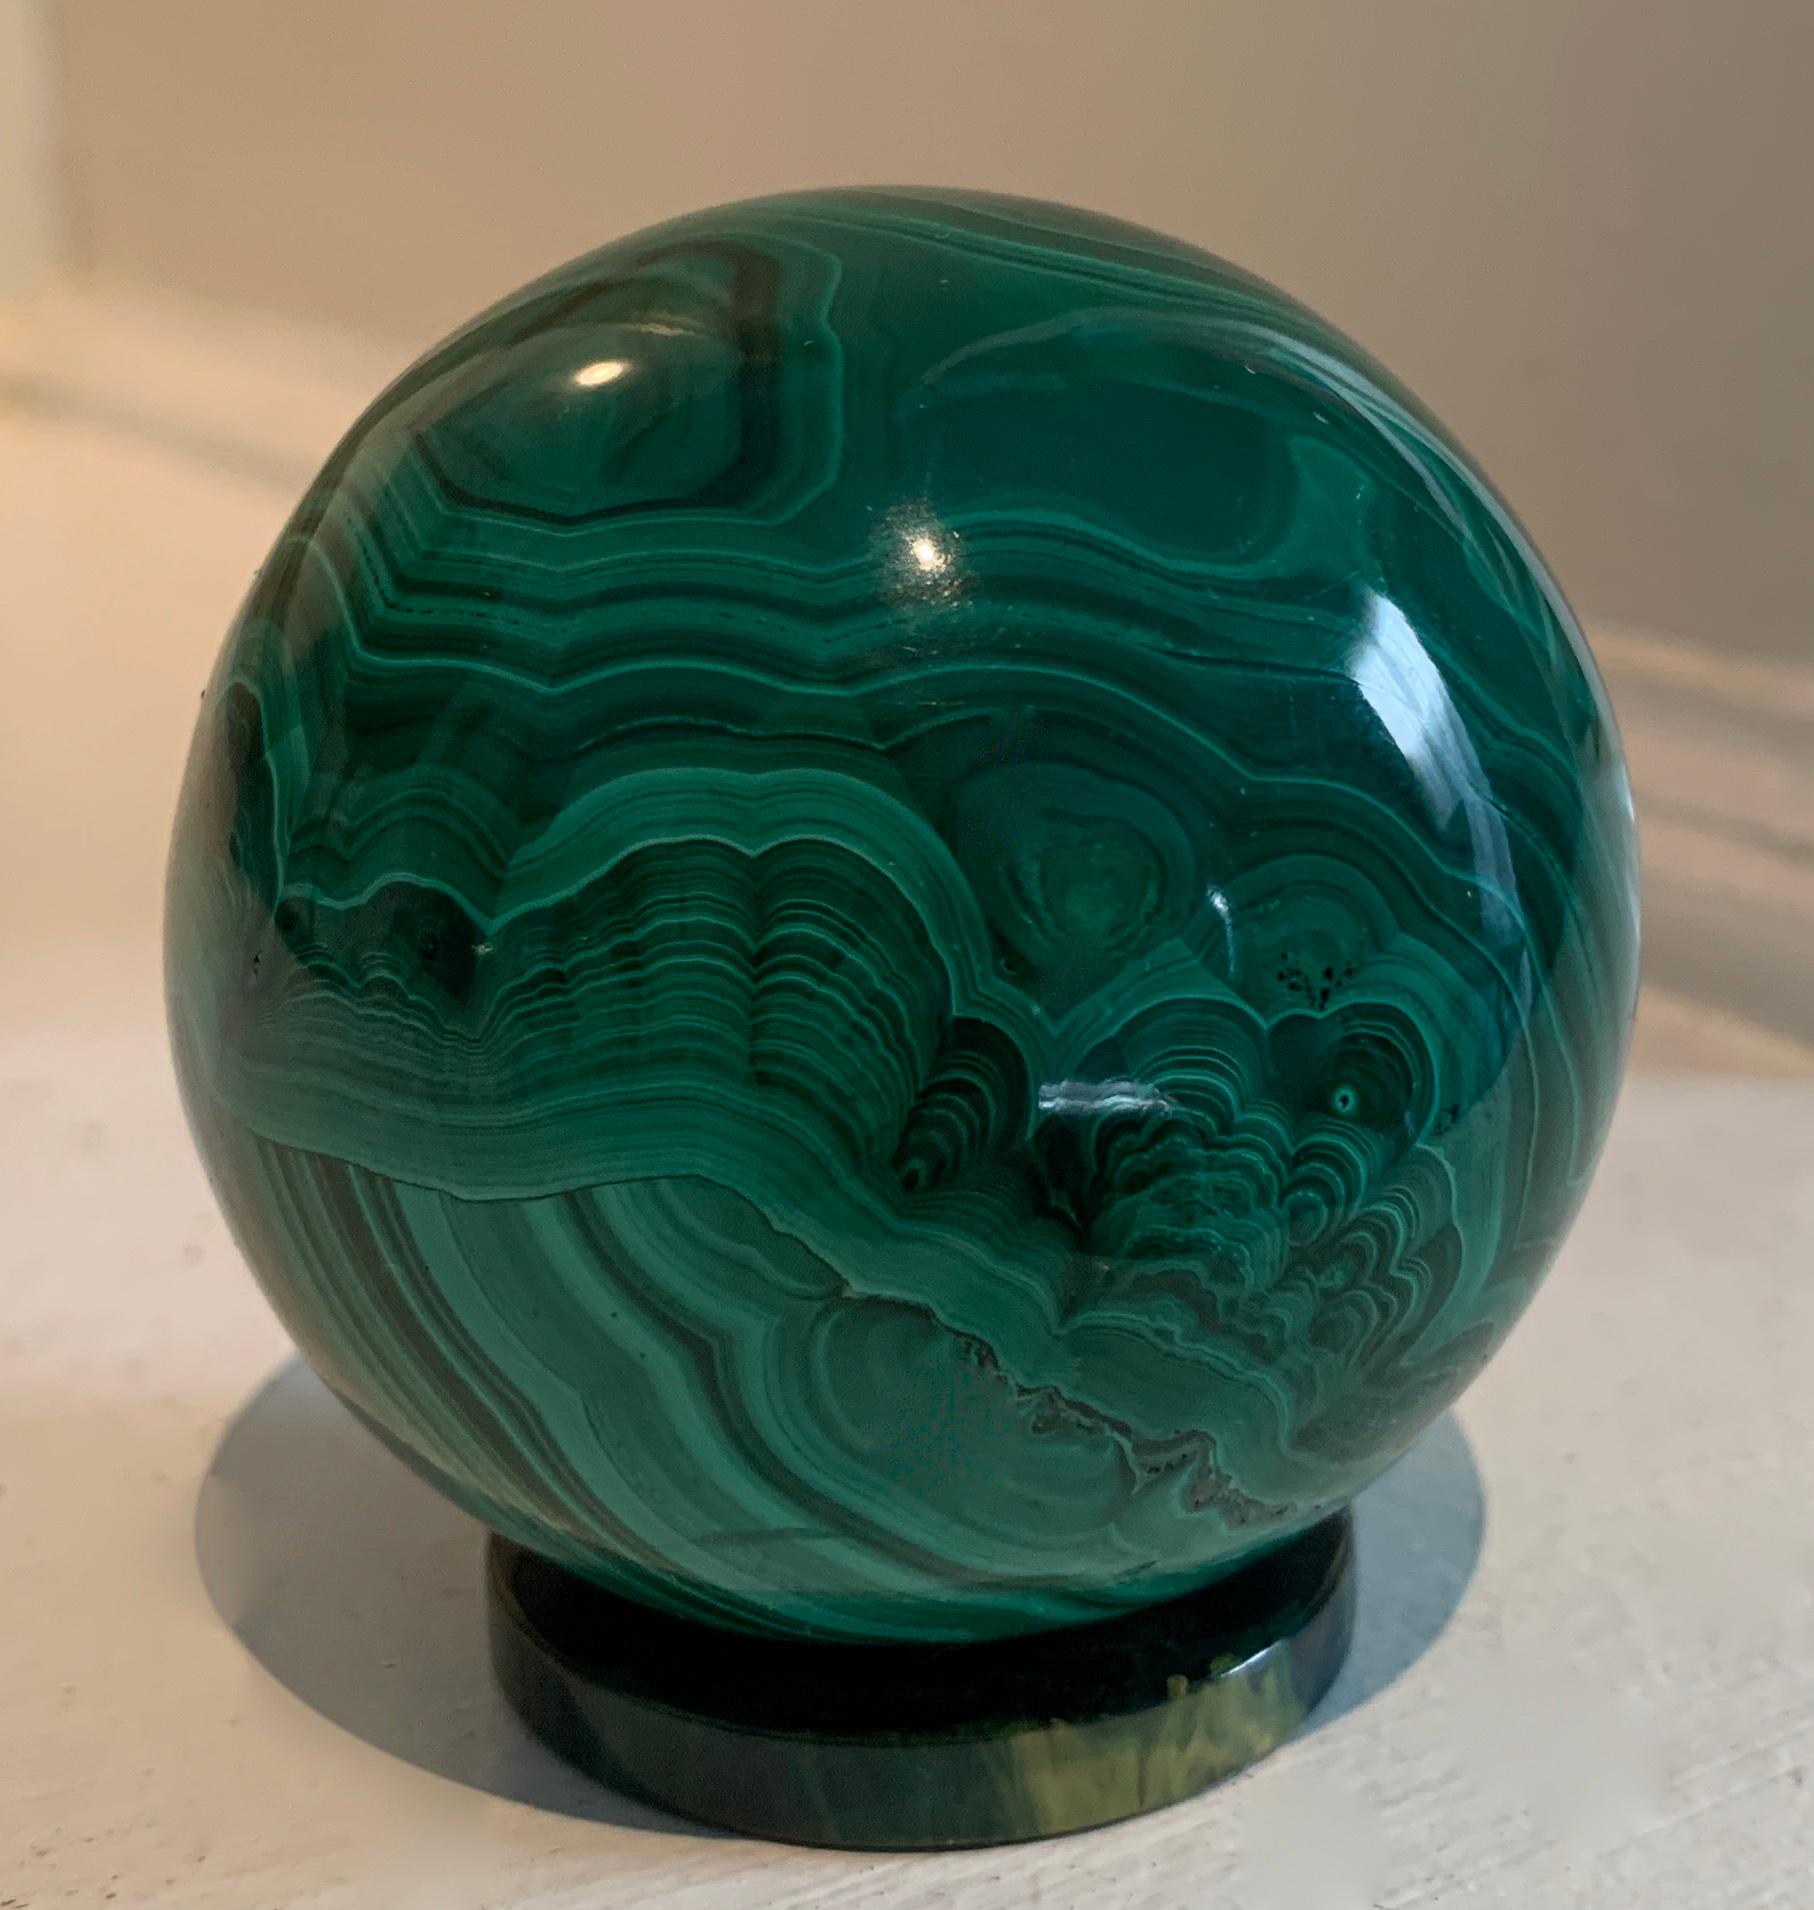 A malachite sphere / ball perfectly suited as an object d'arts for the desk as a stand alone or paper weight.  The piece is also wonderful for a collection of stones or malachite.  A very sexy piece - simple and architectural.  Russian malachite -